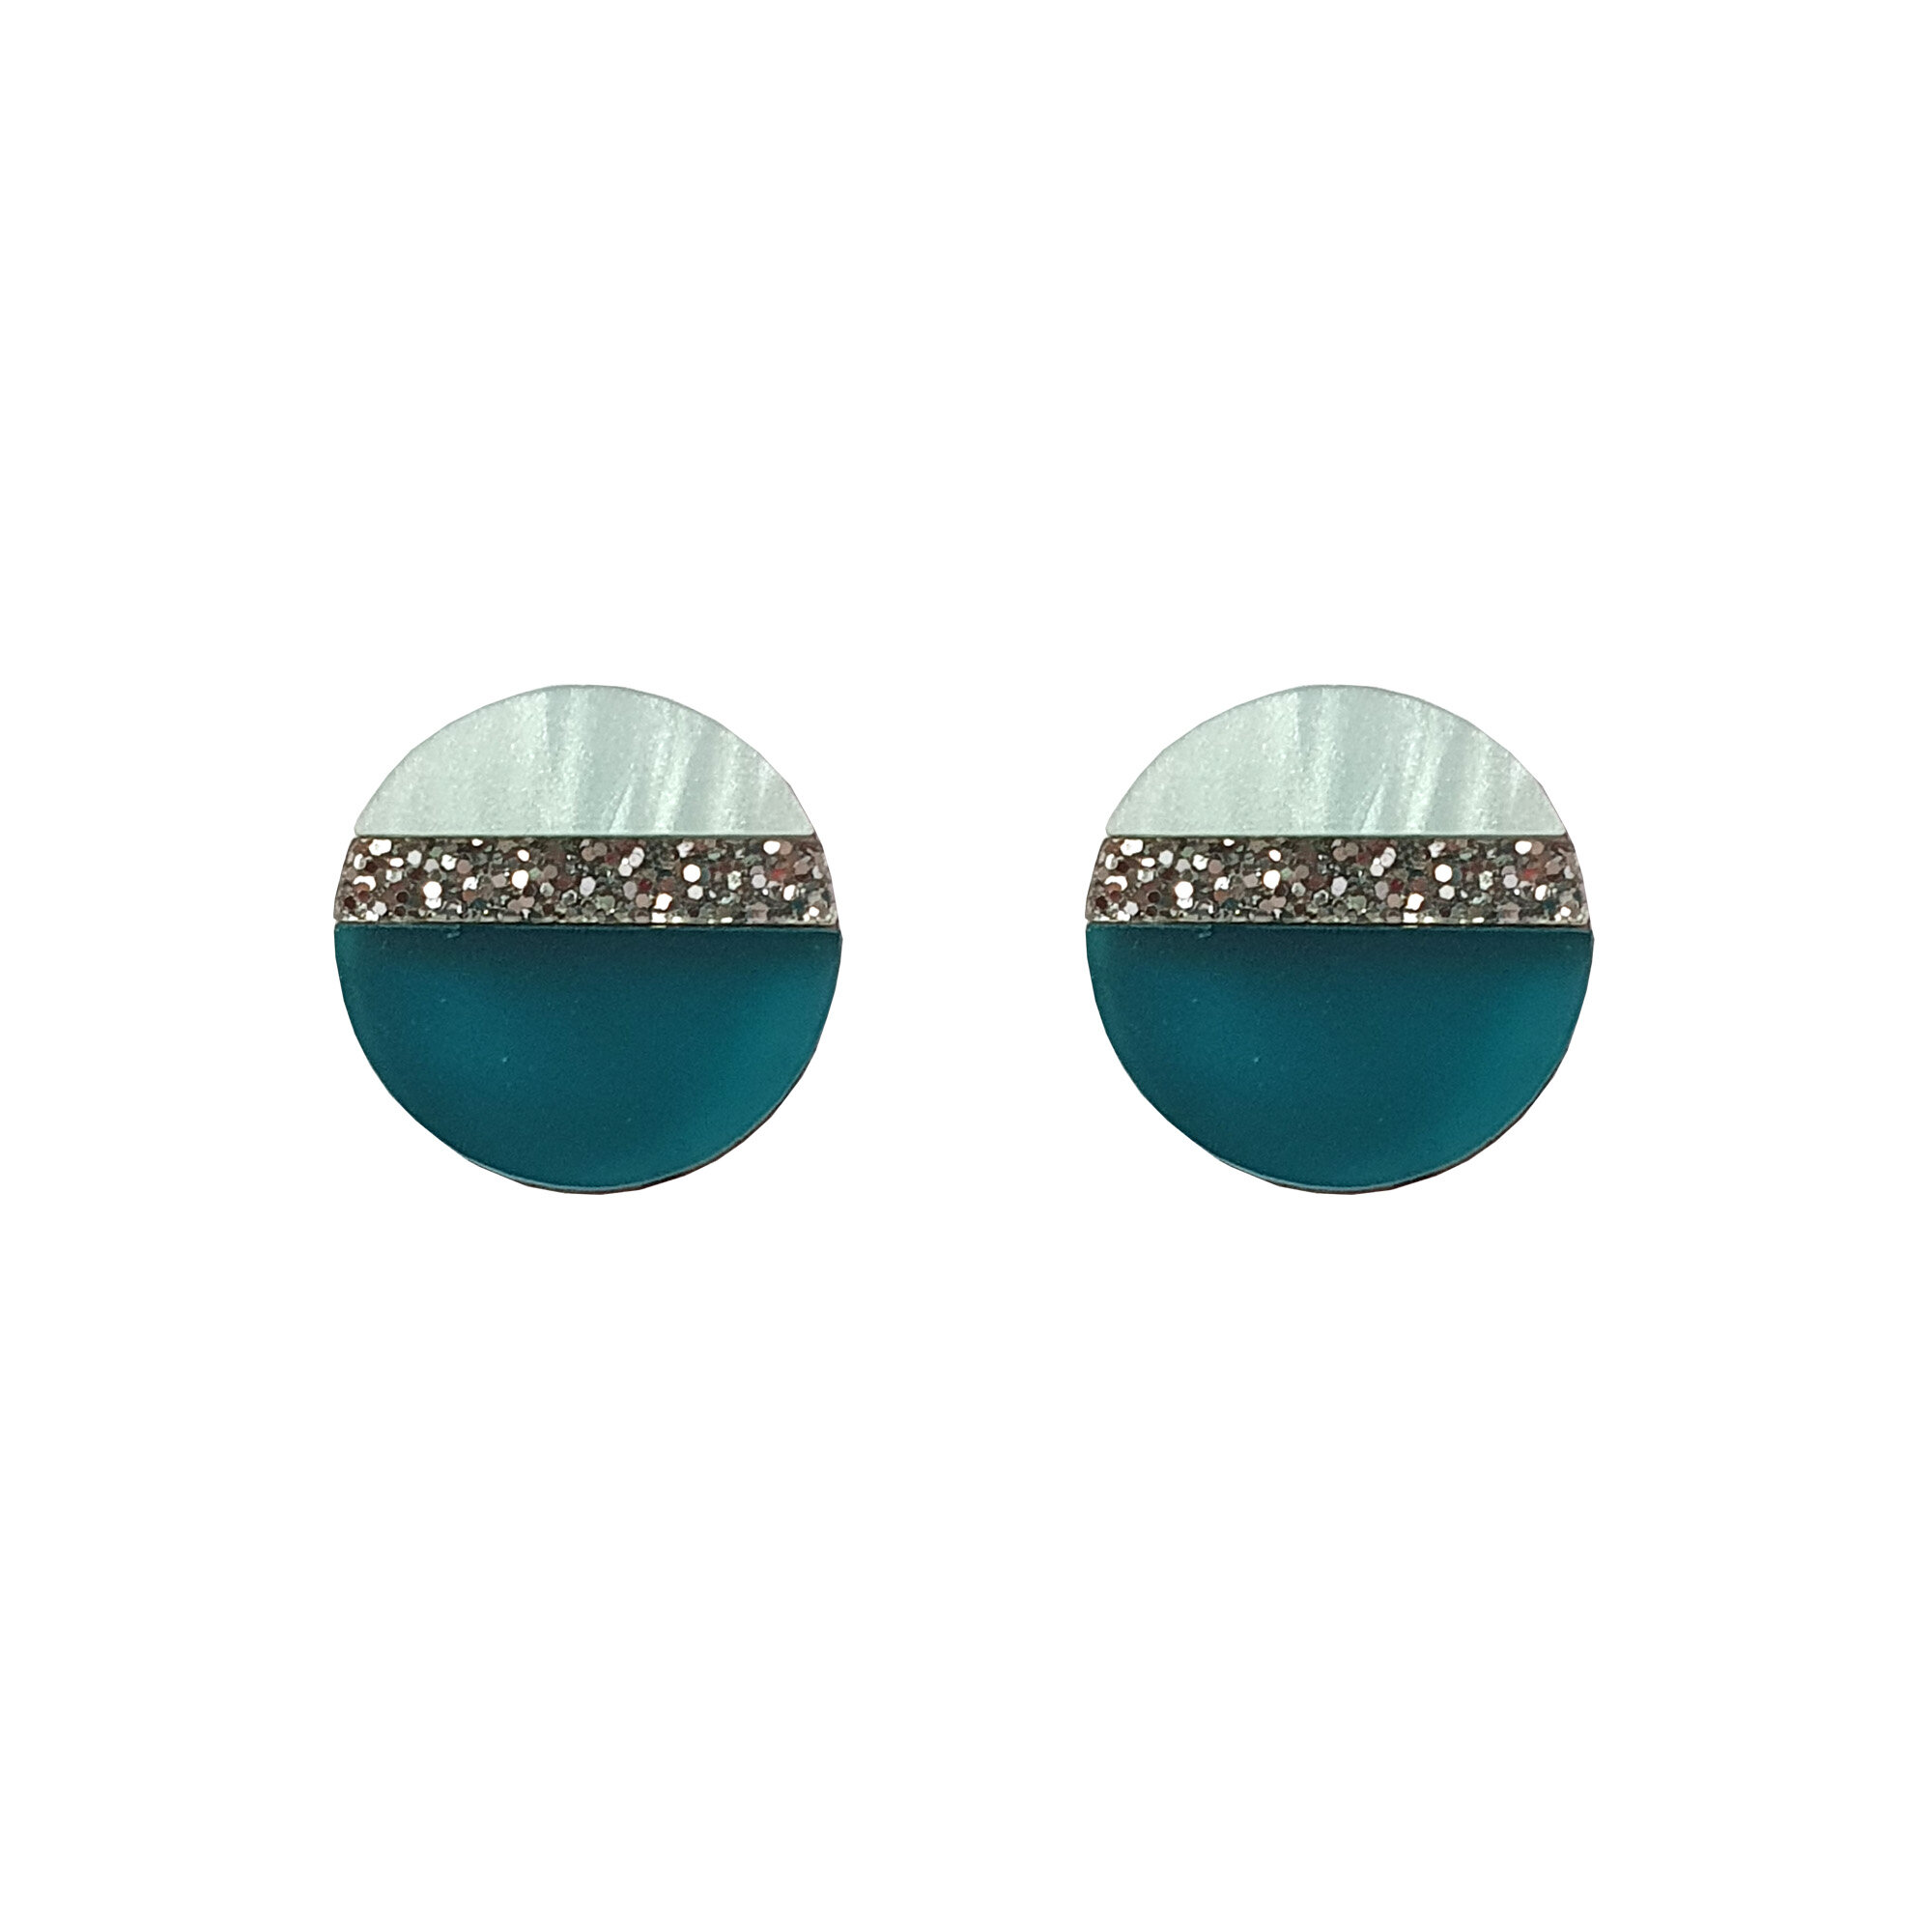 Teal and silver color block earrings